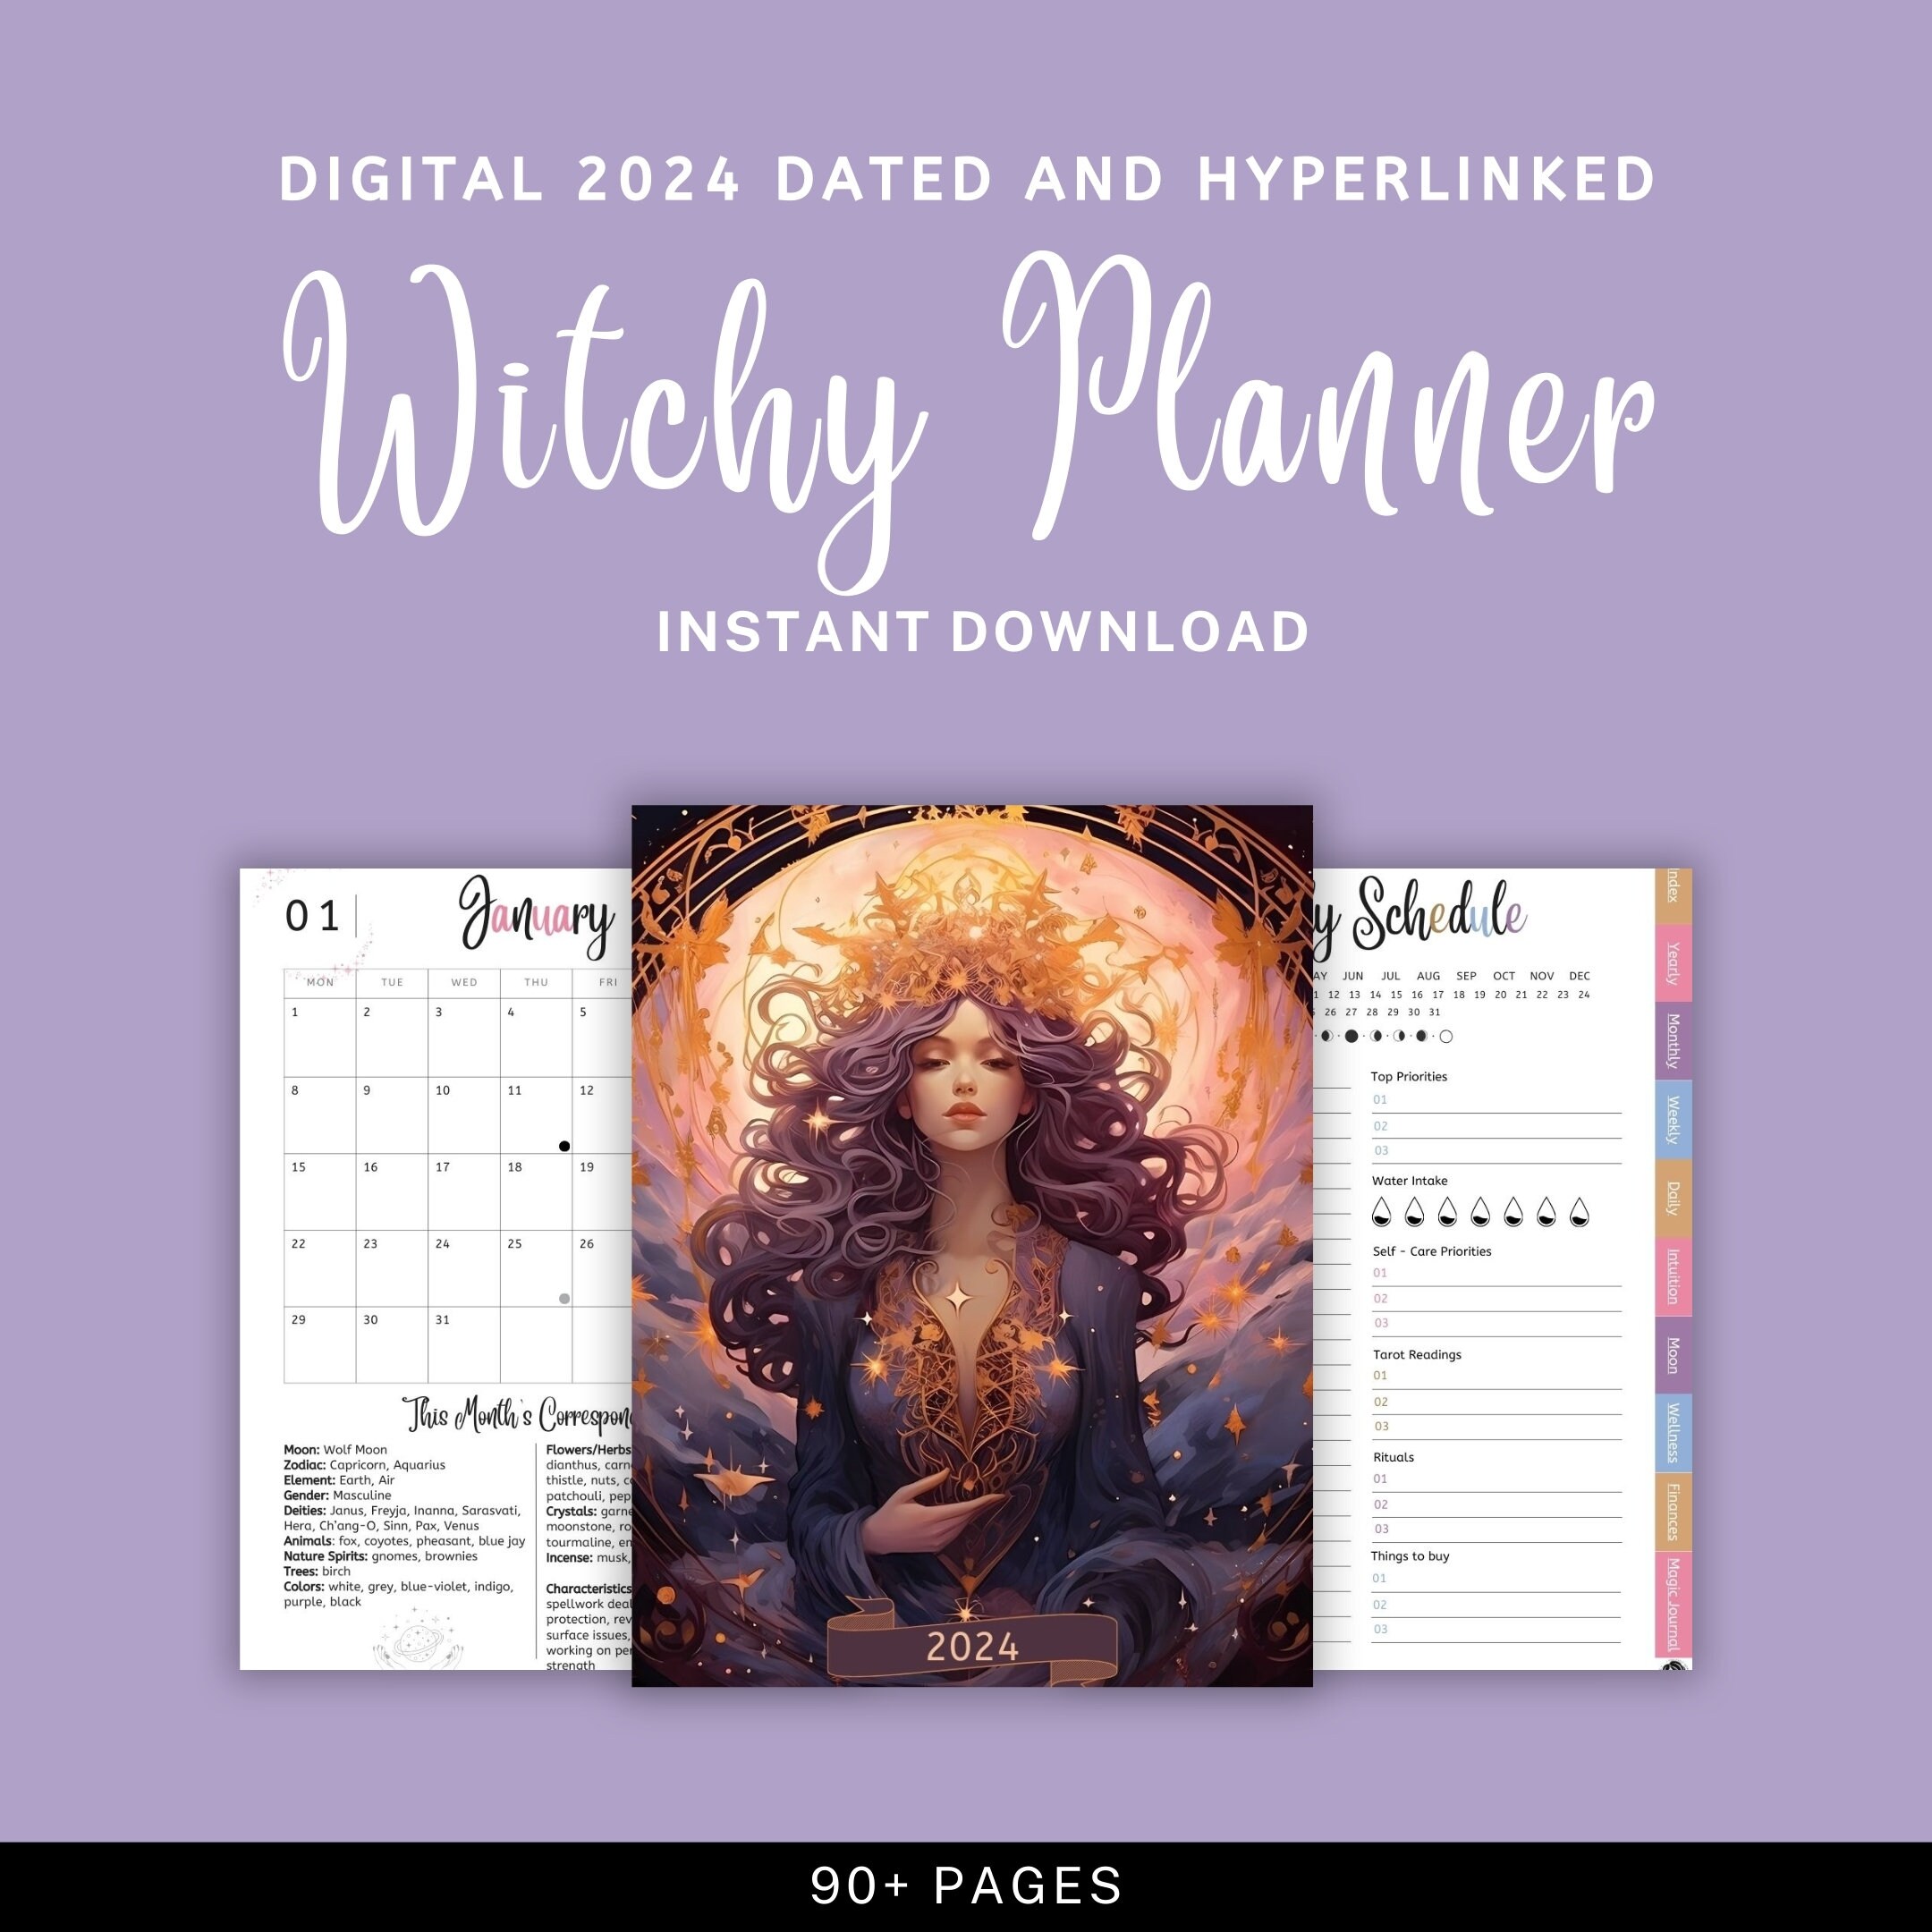 Witchy Digital Sticker Pack, Spiritual Stickers for Witchy Planner, Tarot  Card Goodnotes Stickers 